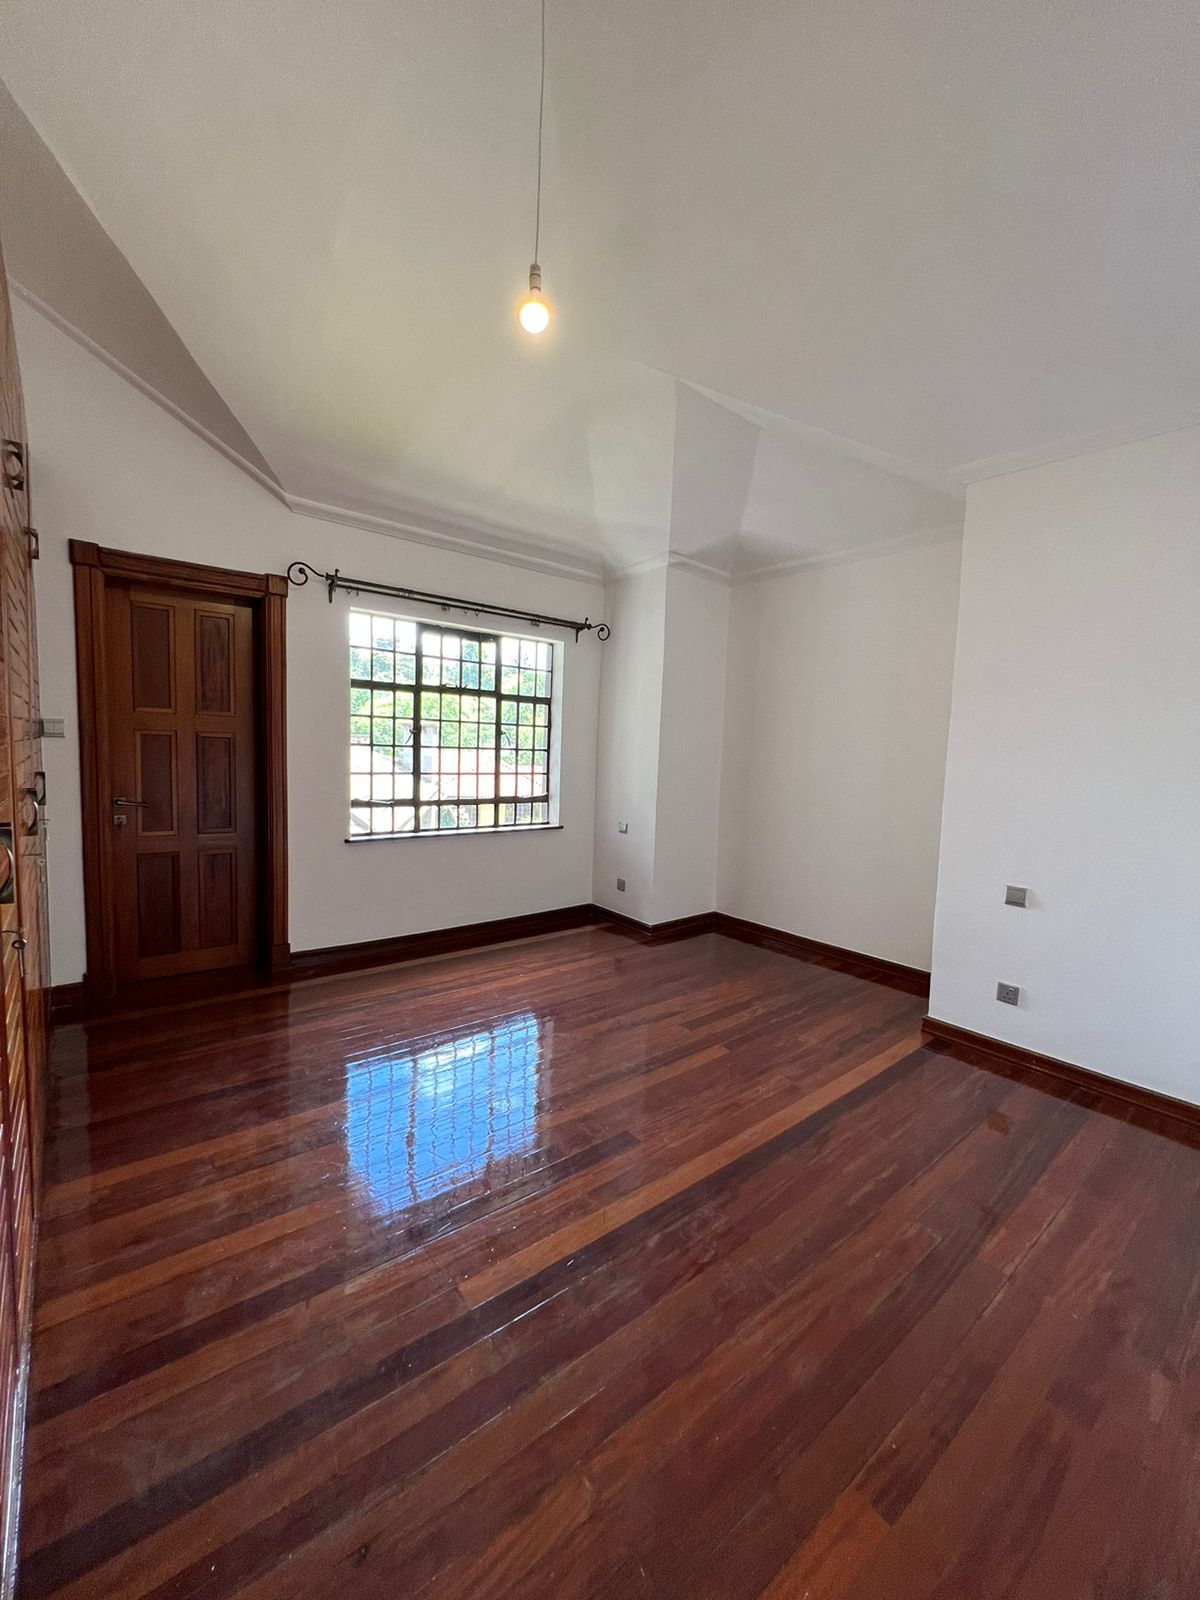 5 bedroom townhouse plus dsq along Peponi Road. UN approved location. Rent per month USD 3500. Listed by Musilli Homes